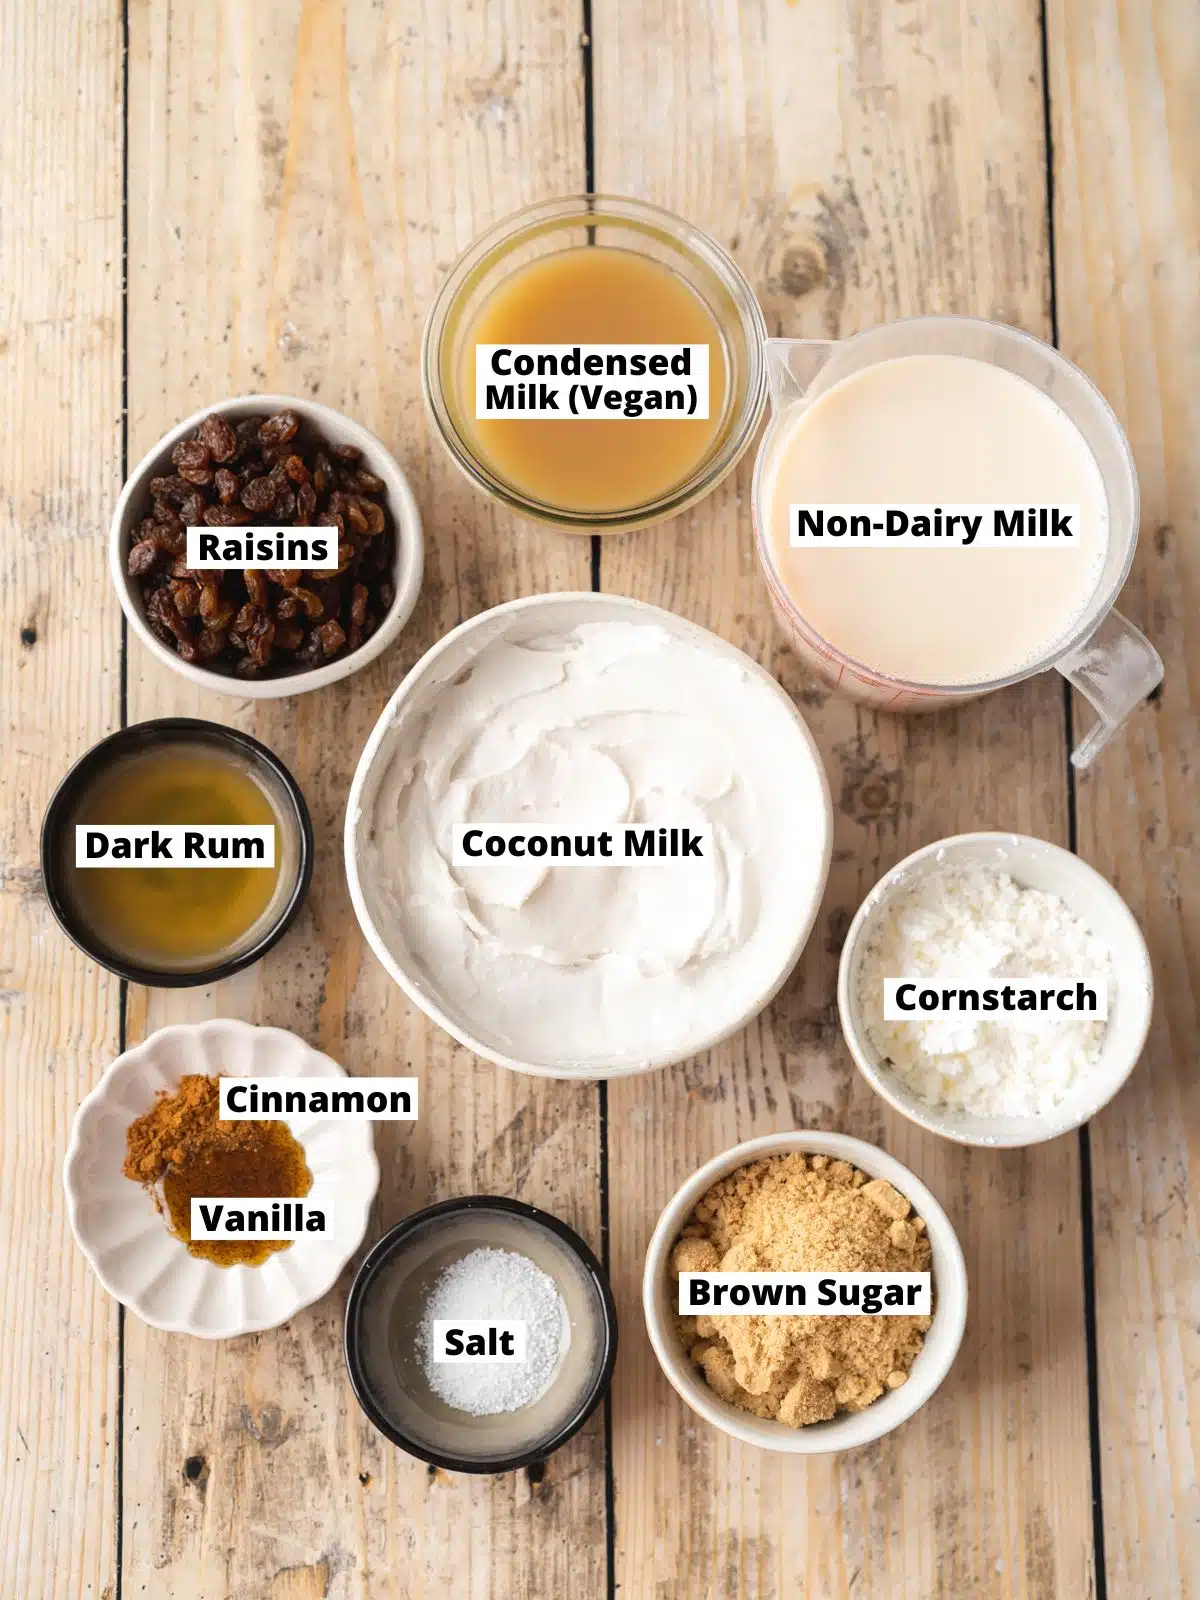 Ingredients needed to make vegan rum and raisin ice cream measured out into bowls on a wooden table with text overlay.